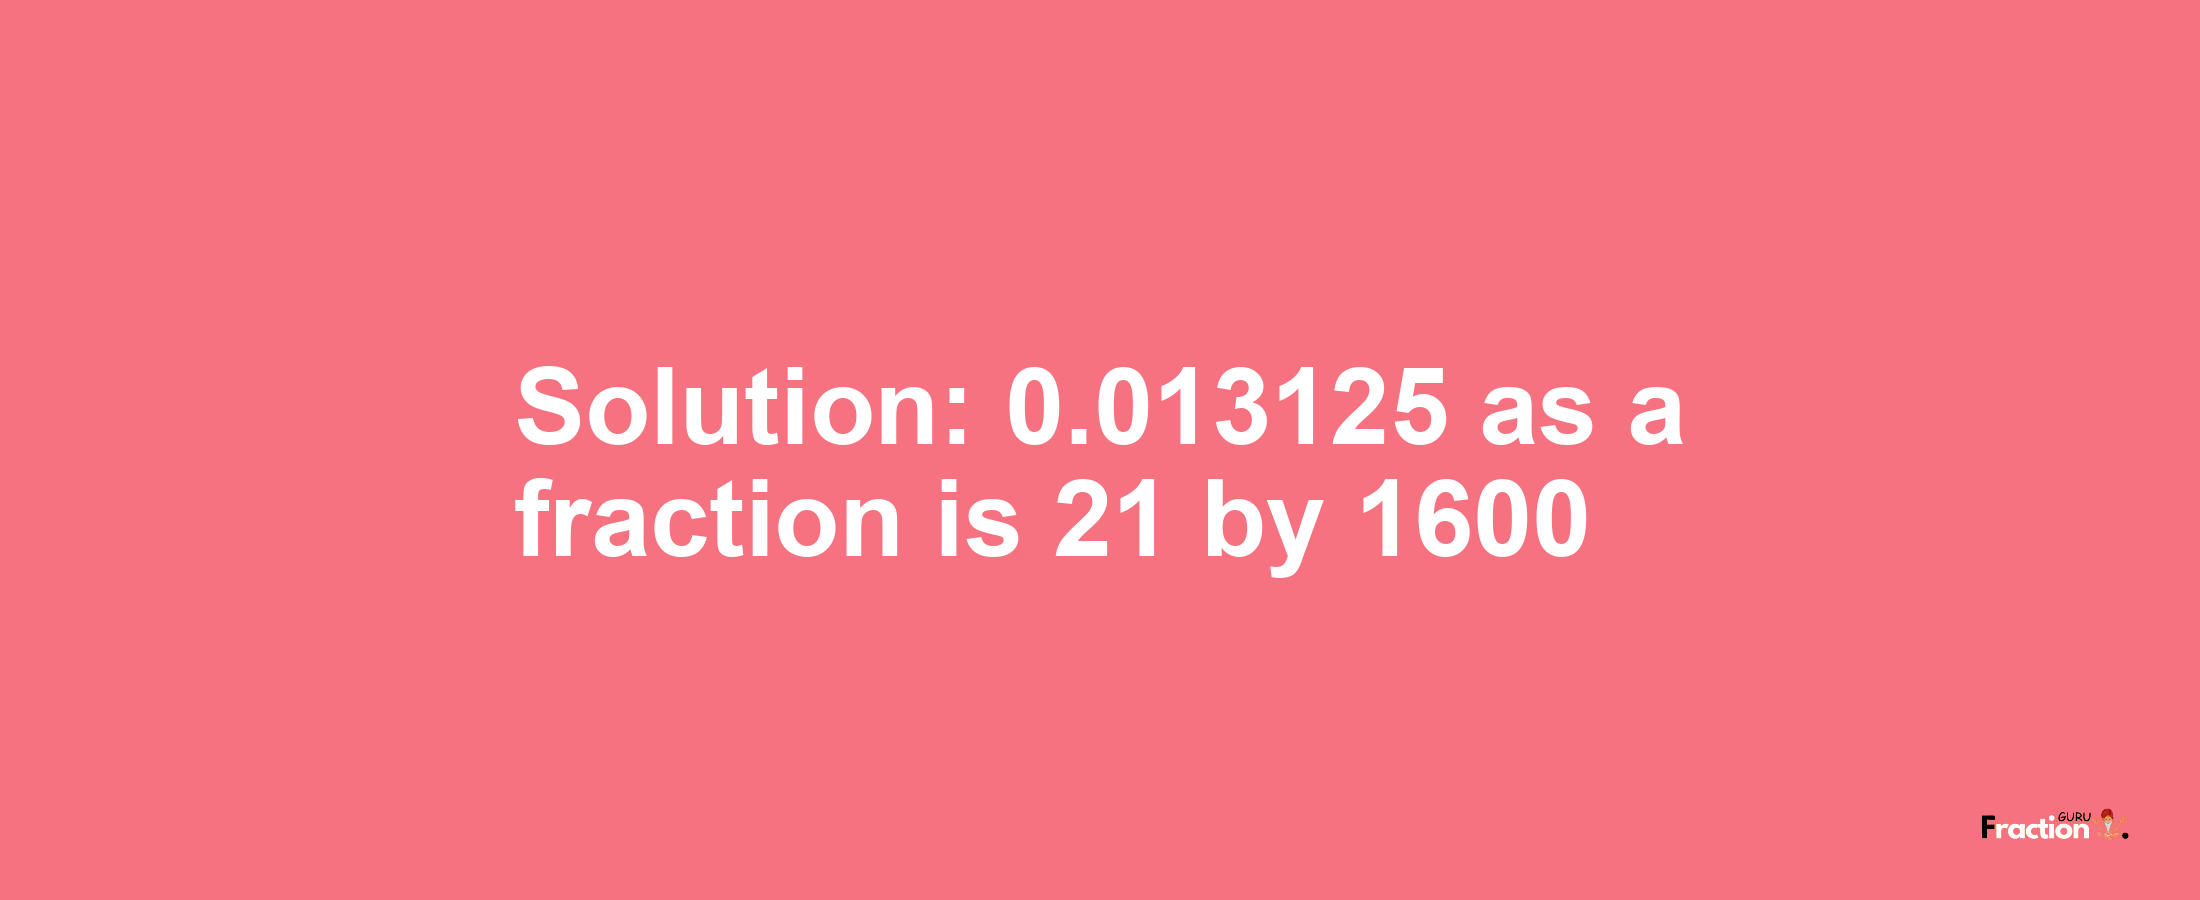 Solution:0.013125 as a fraction is 21/1600